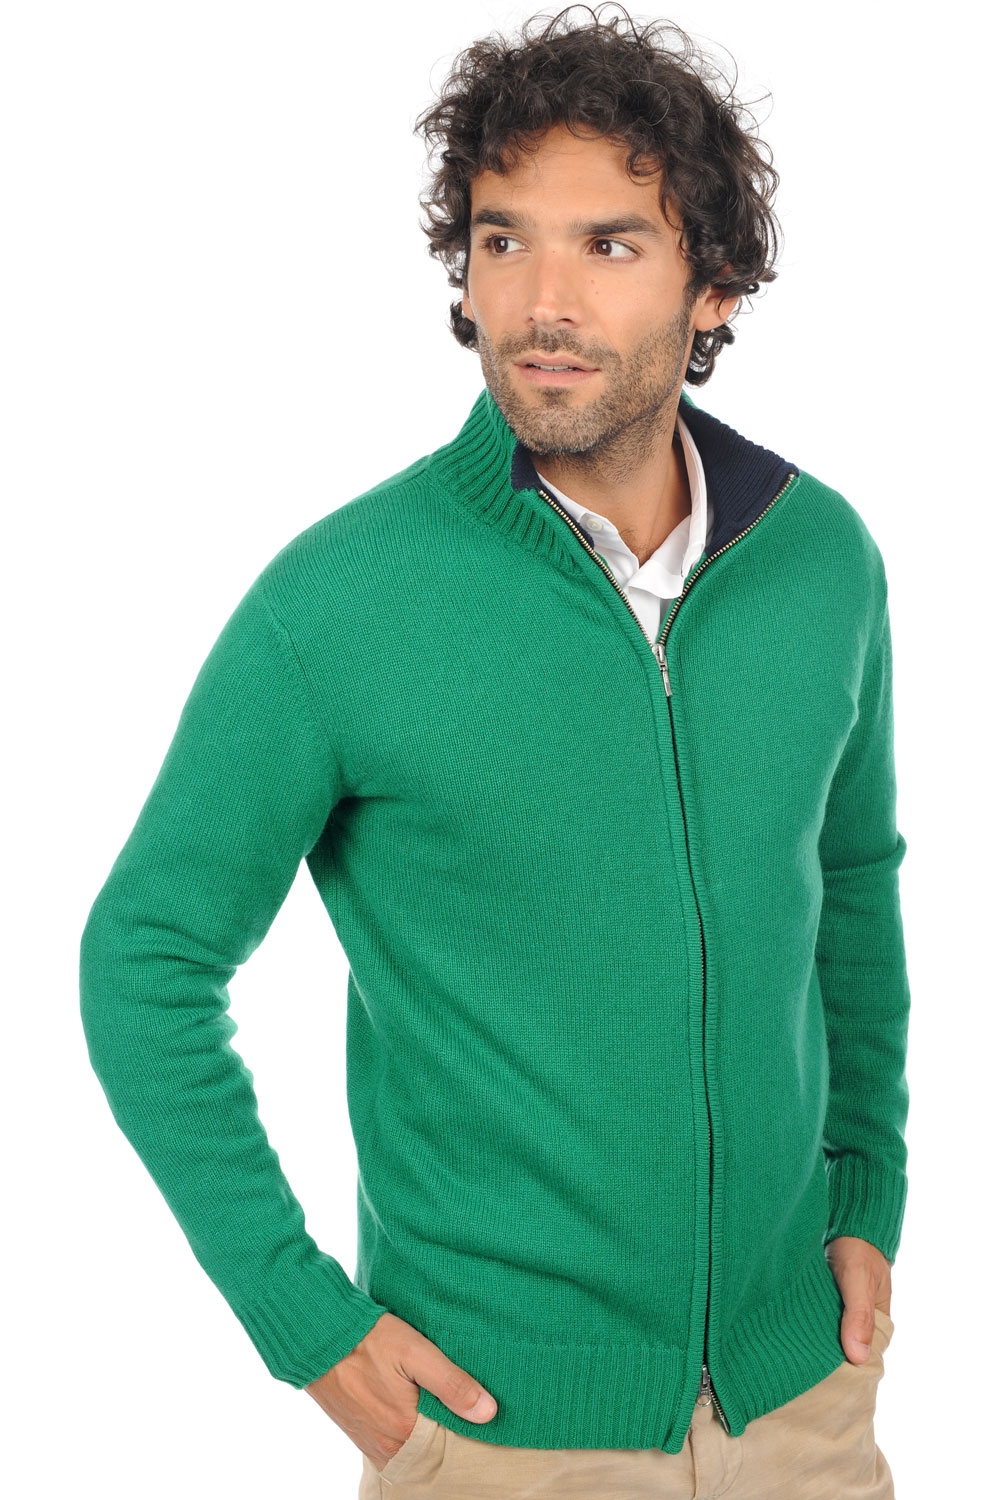 Cachemire pull homme maxime vert anglais marine fonce s